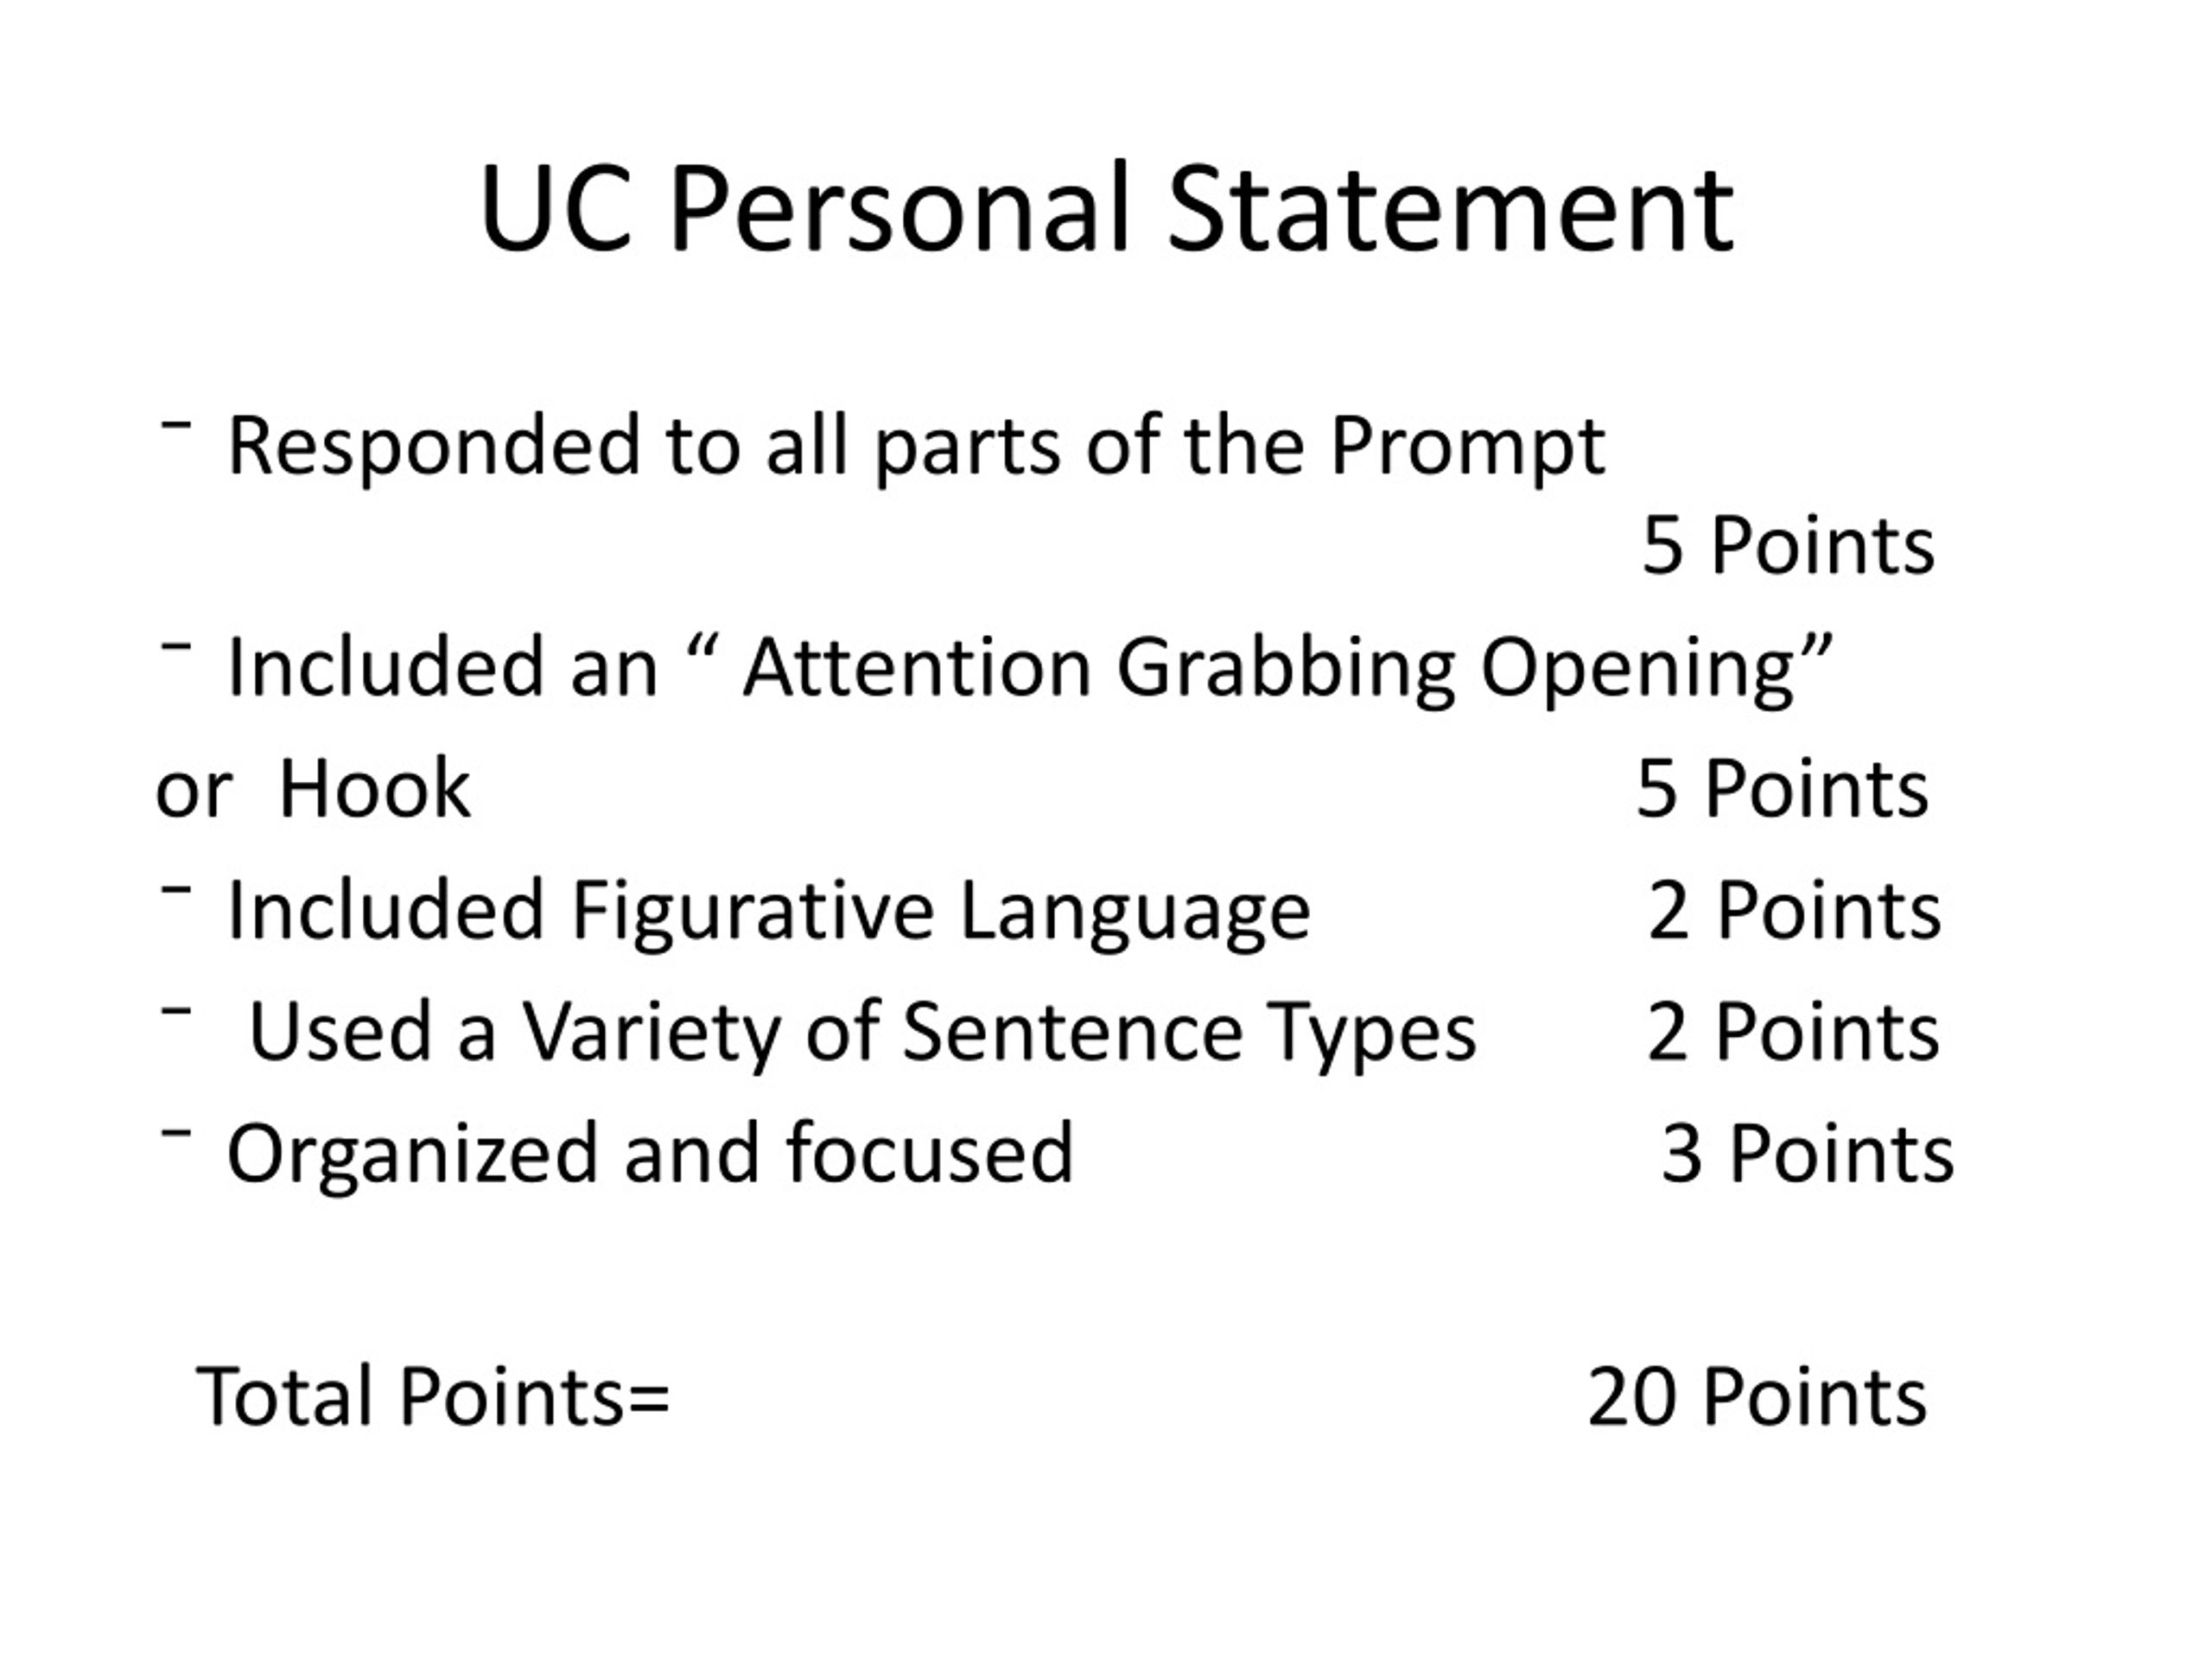 uc personal statement examples prompt 1